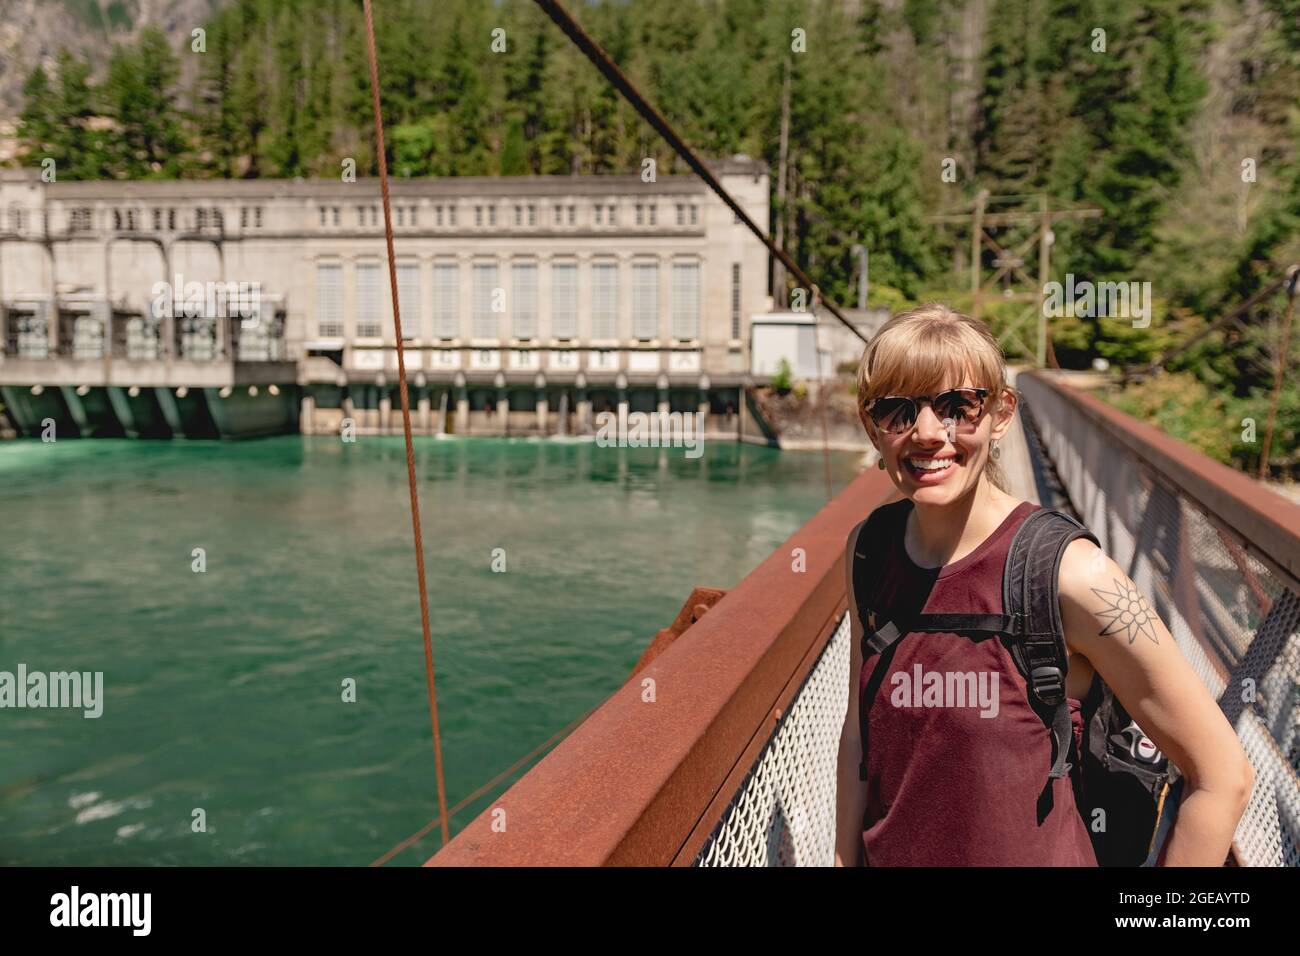 Woman smiling on a suspension bridge spanning the Skagit river in North Cascades National Park. Stock Photo